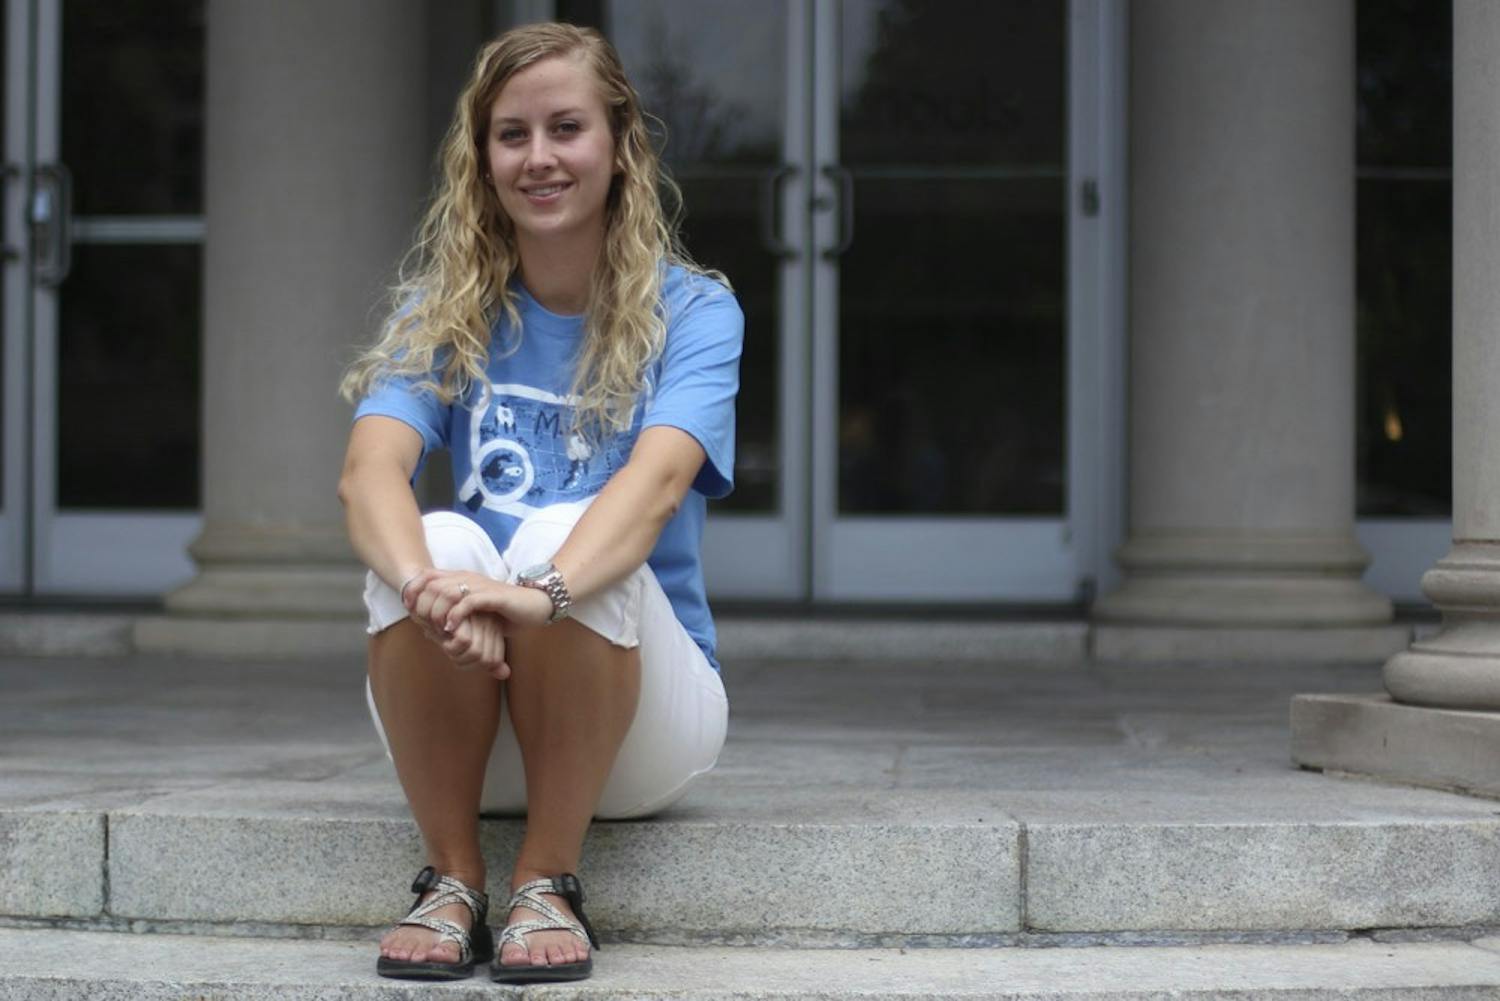 Ashley Shaver, an elementary education student, sits on the step of Peabody, the academic building for the School of Education.